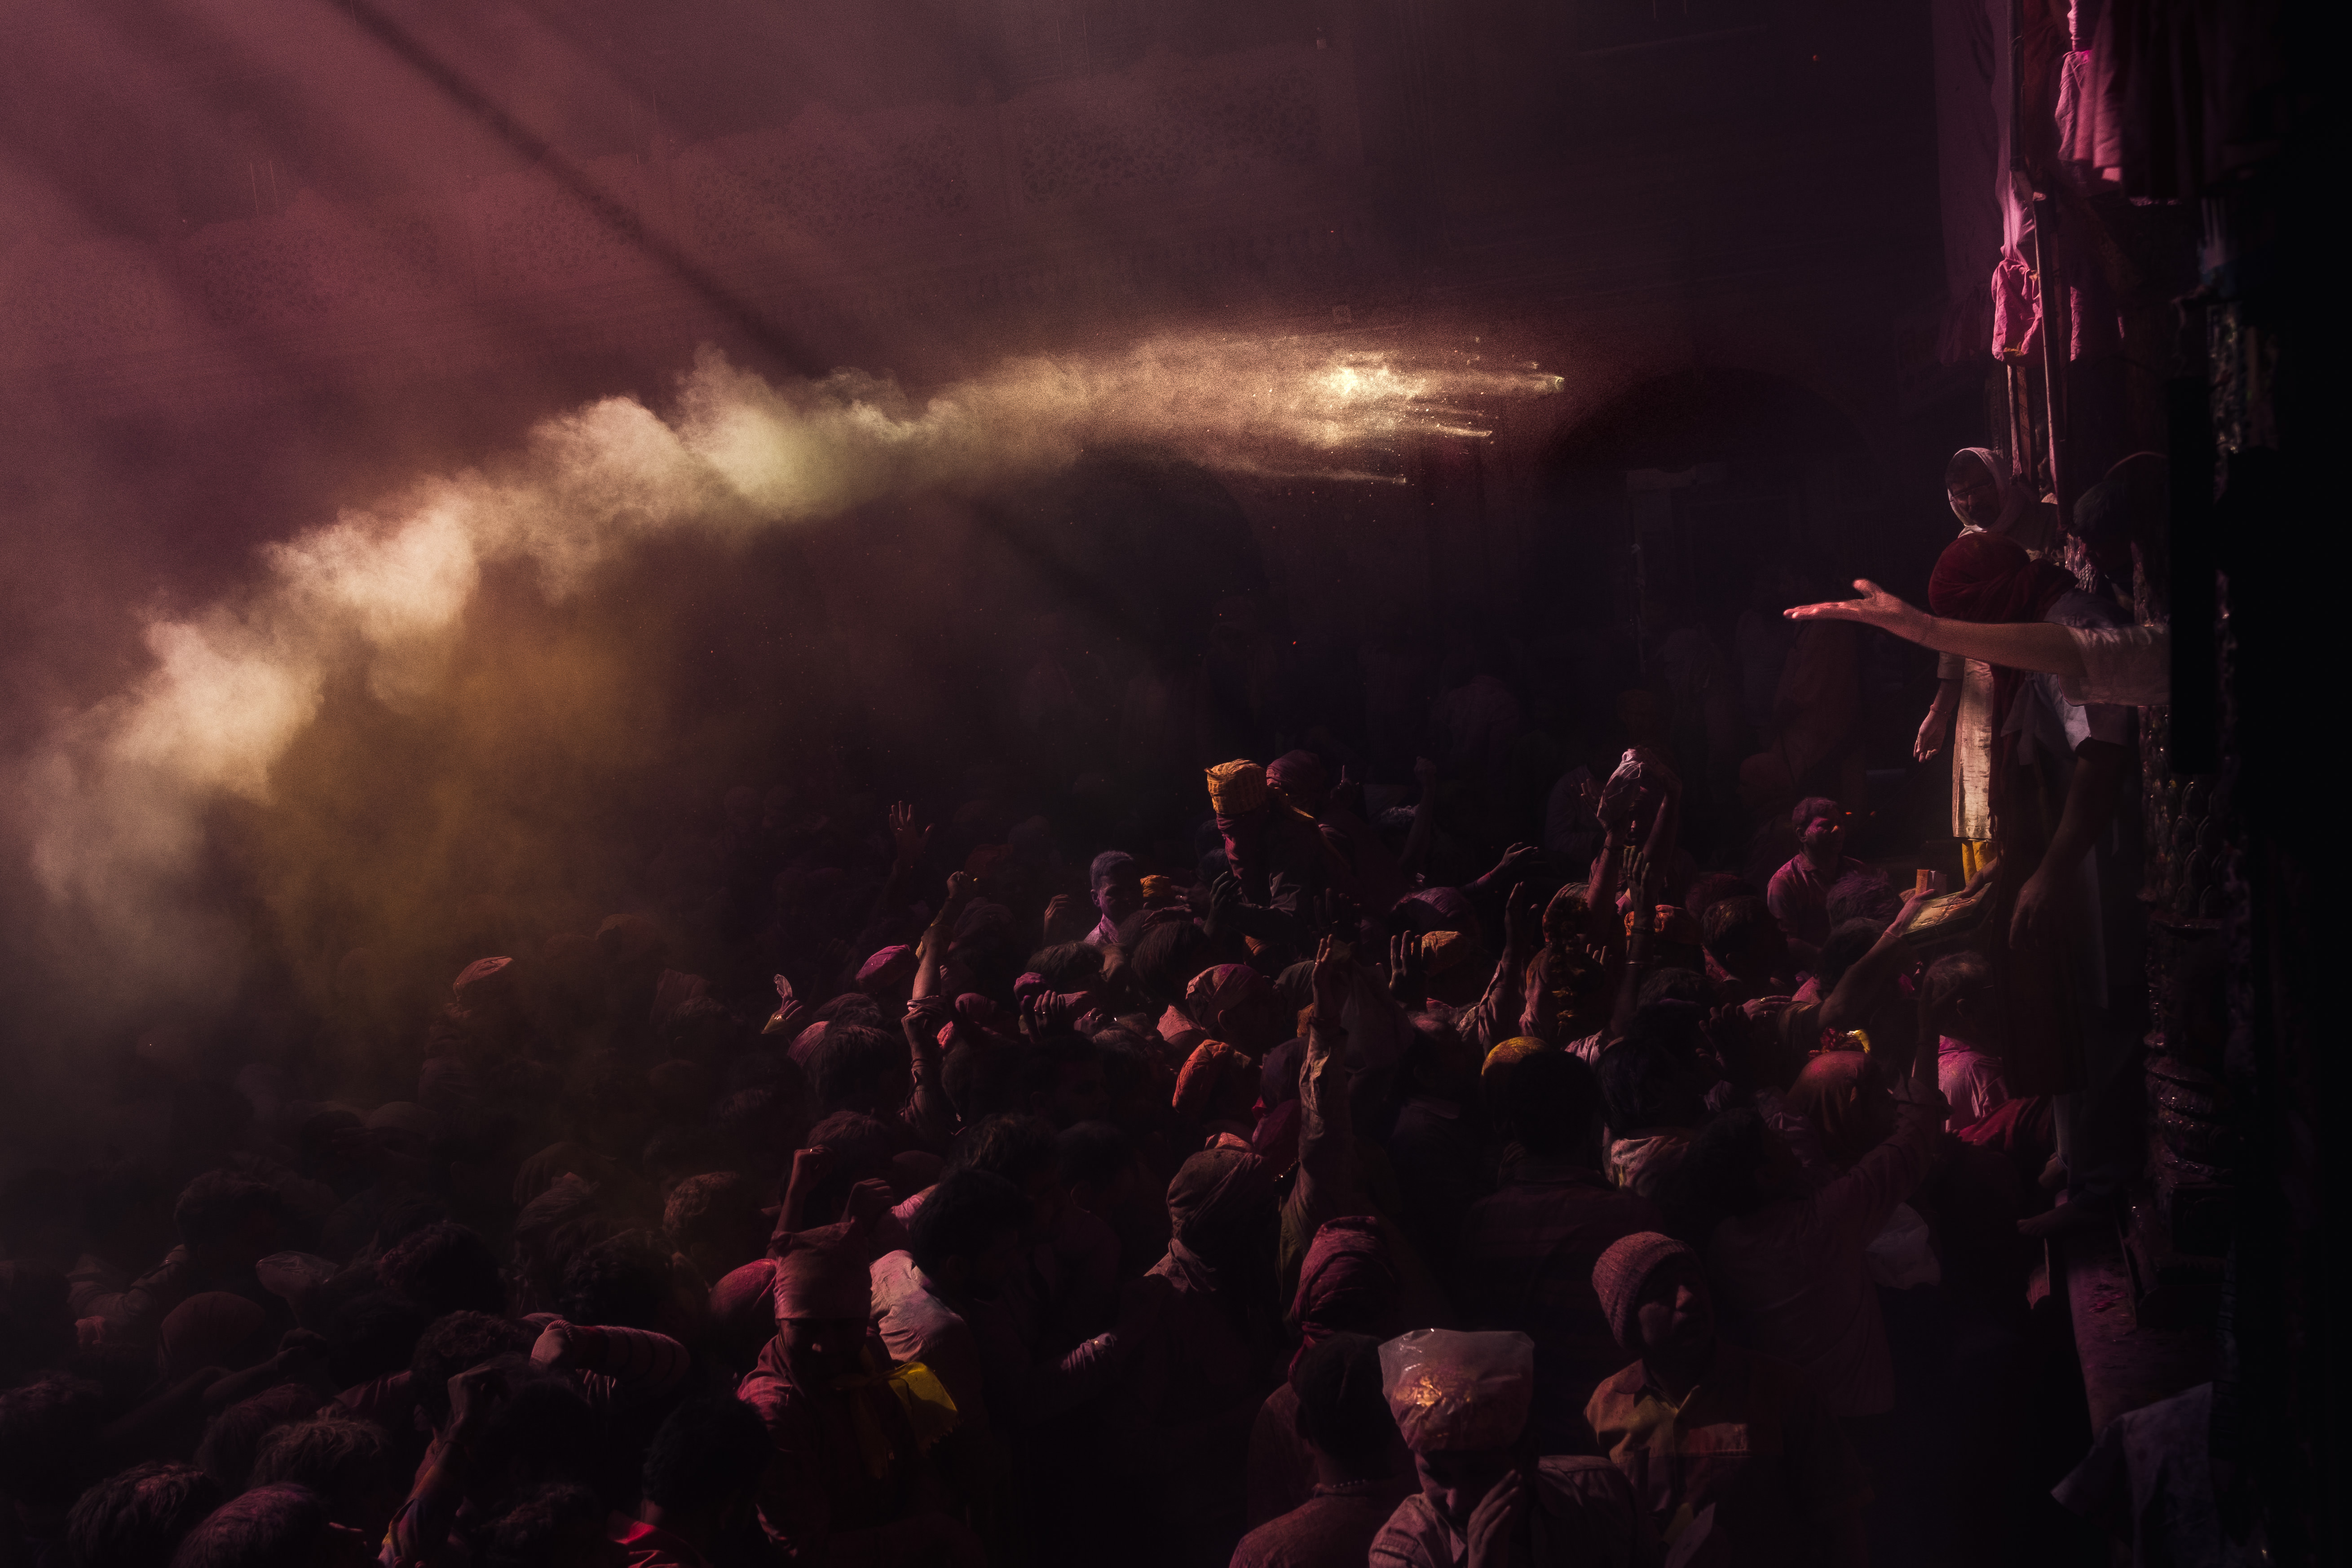 India Street Photography During Holi Festival. flying powder appears to be landing in outreached hand. Images by Jason Vinson